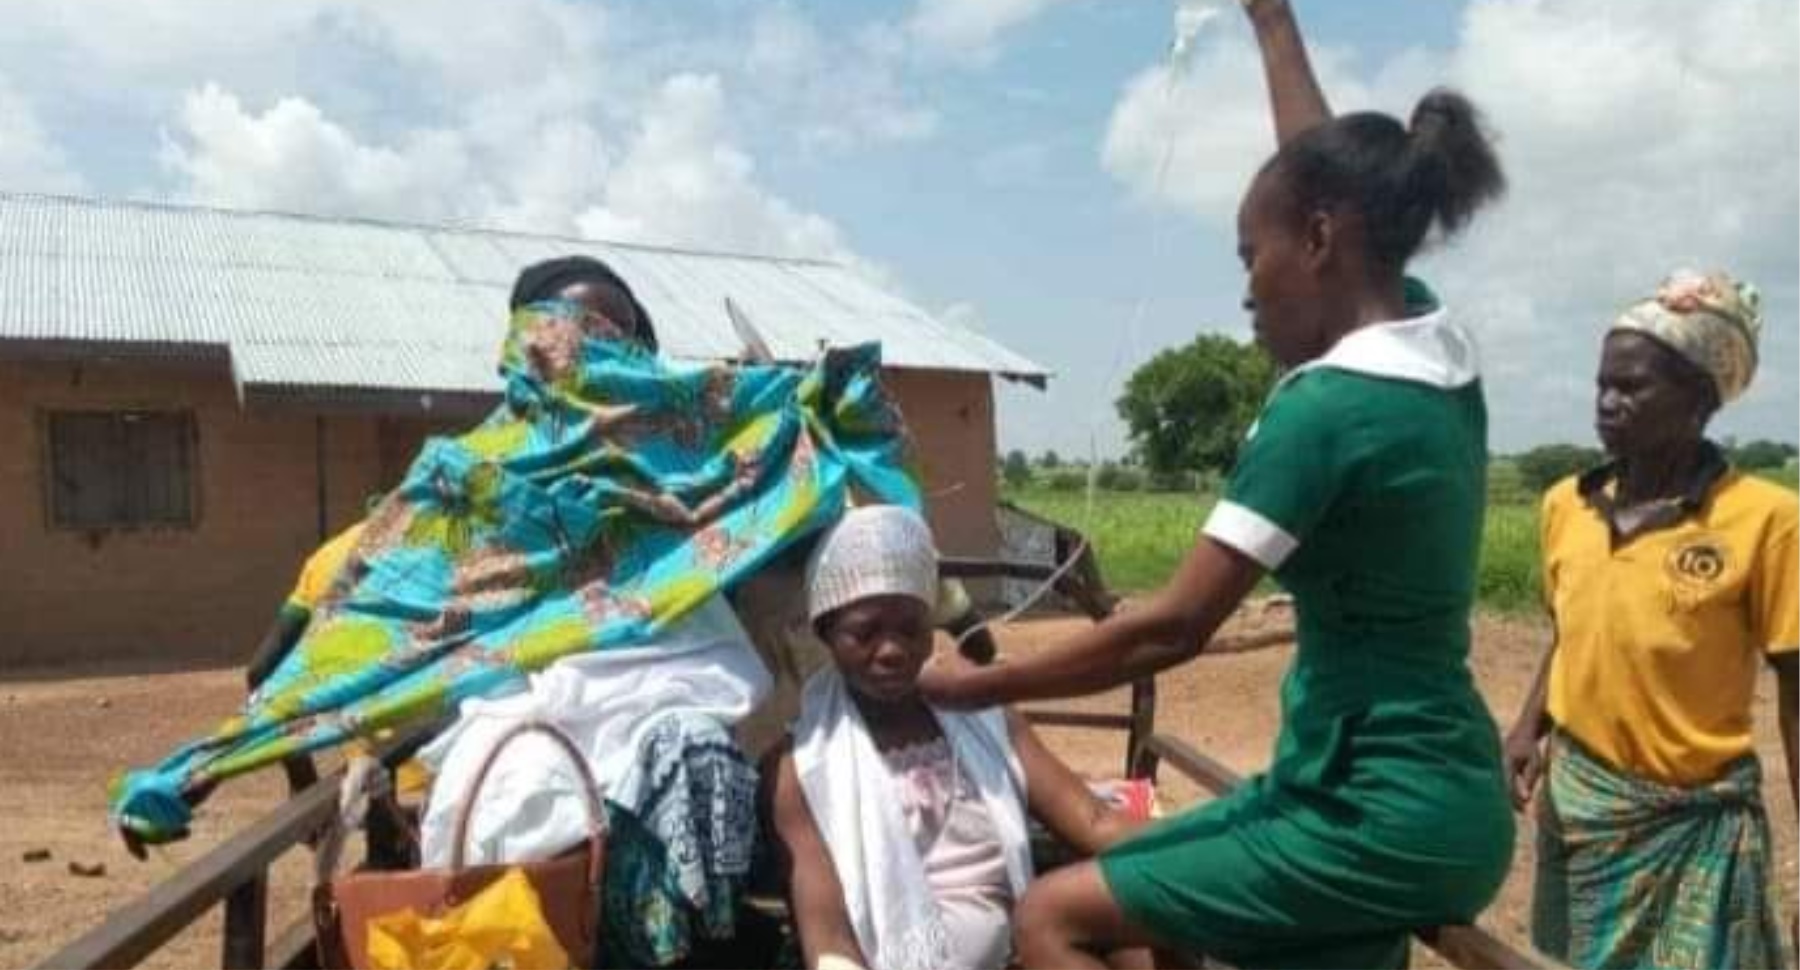 29-year-old midwife forced to transport birthing mother in tricycle due to lack of ambulance